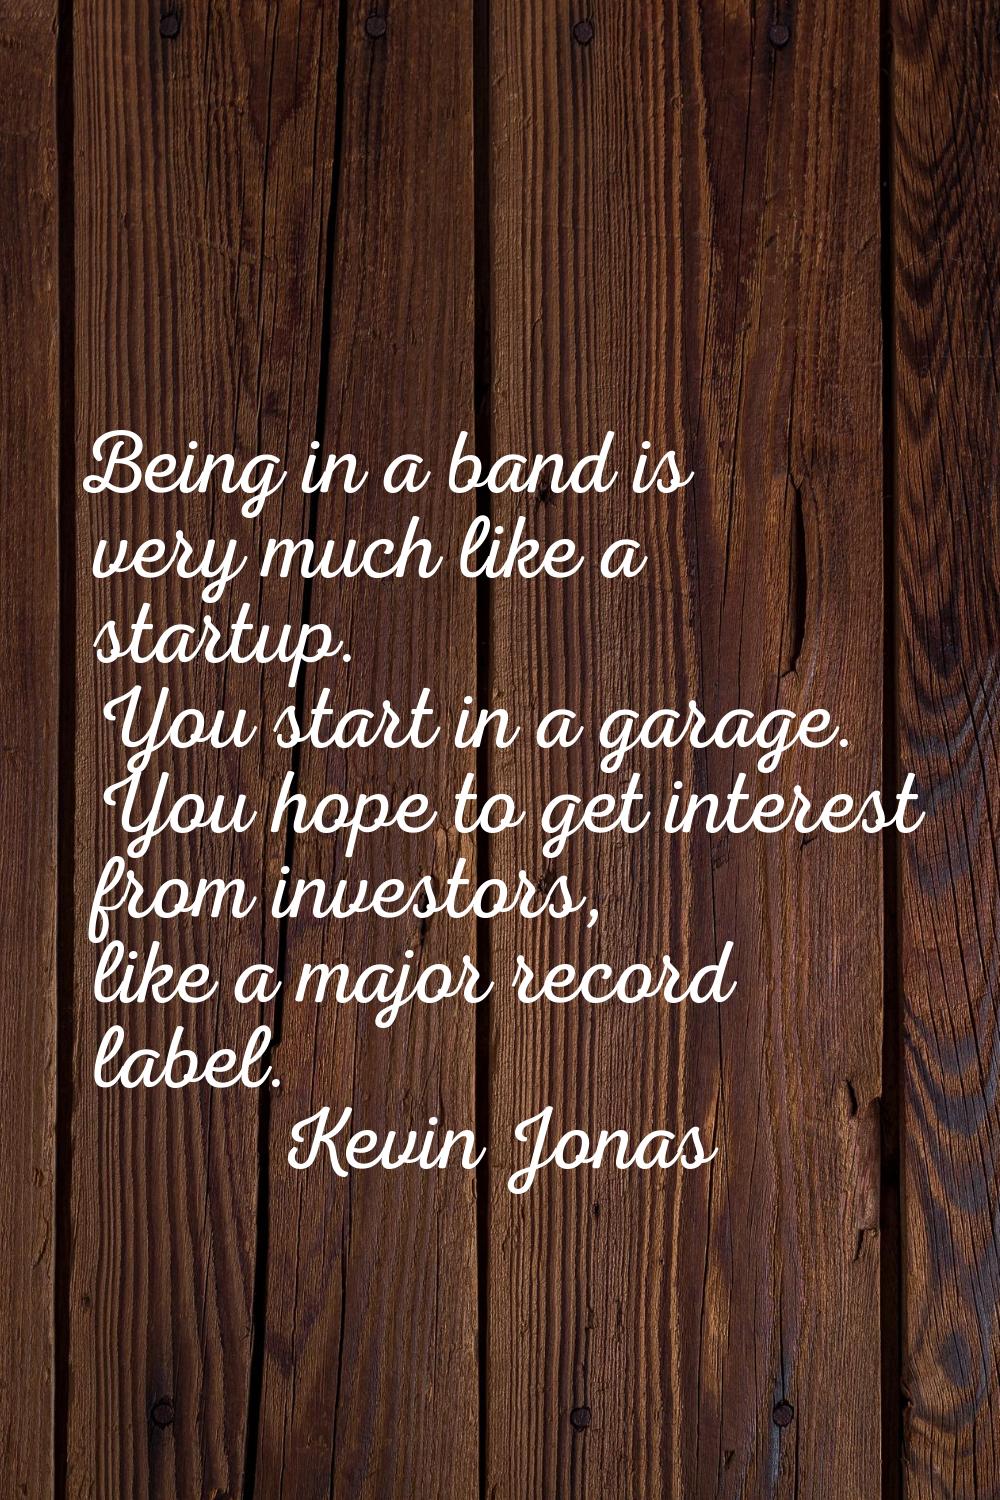 Being in a band is very much like a startup. You start in a garage. You hope to get interest from i